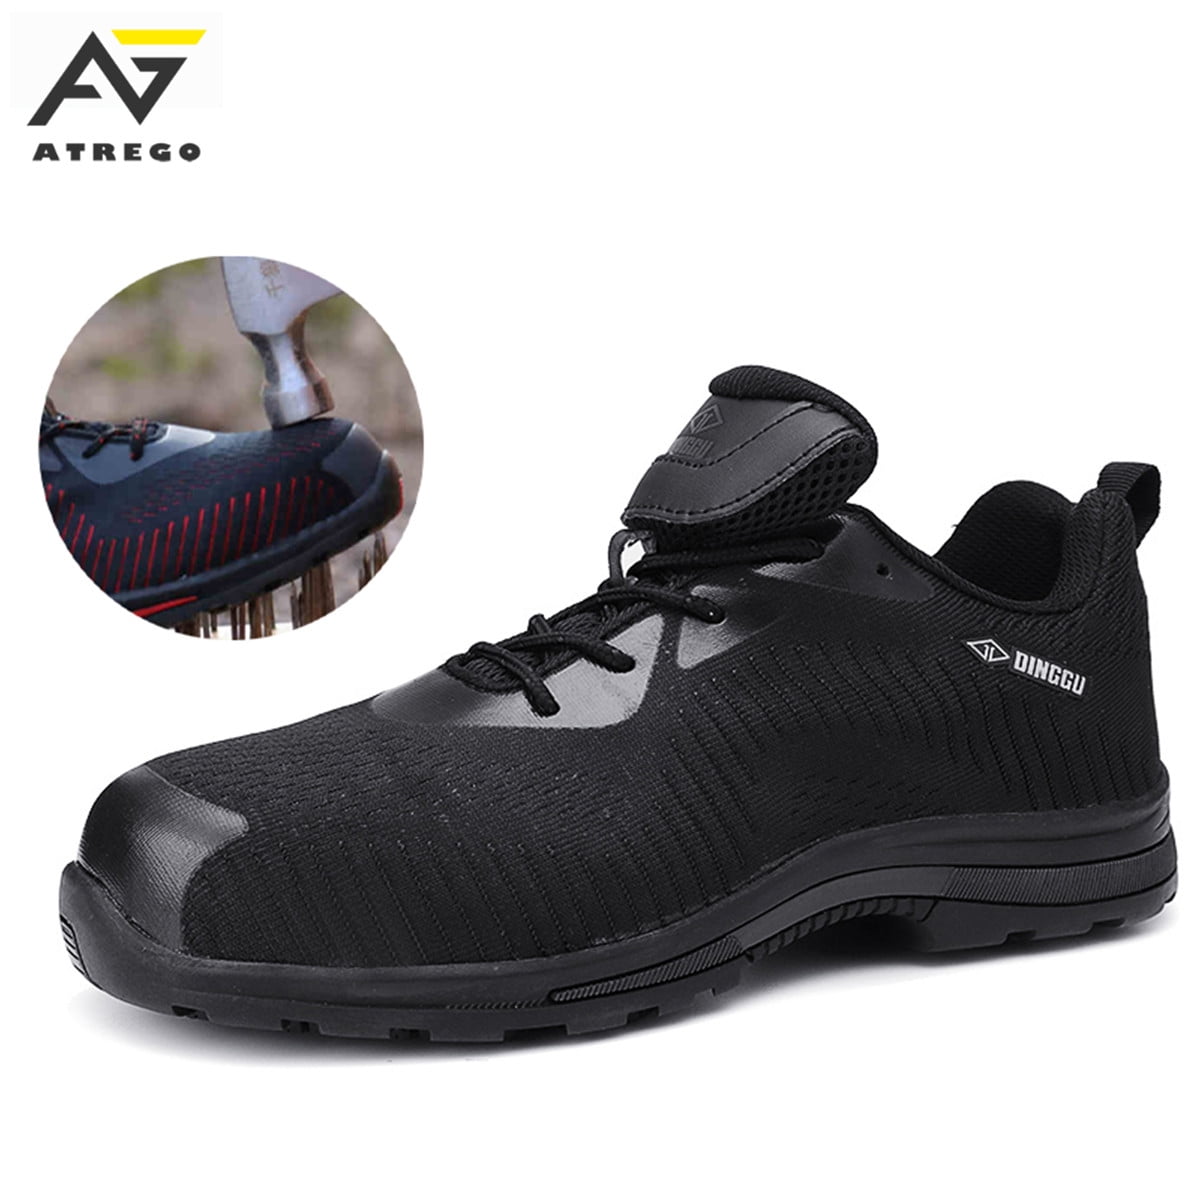 ATREGO Safety Shoes Steel Toe Work 